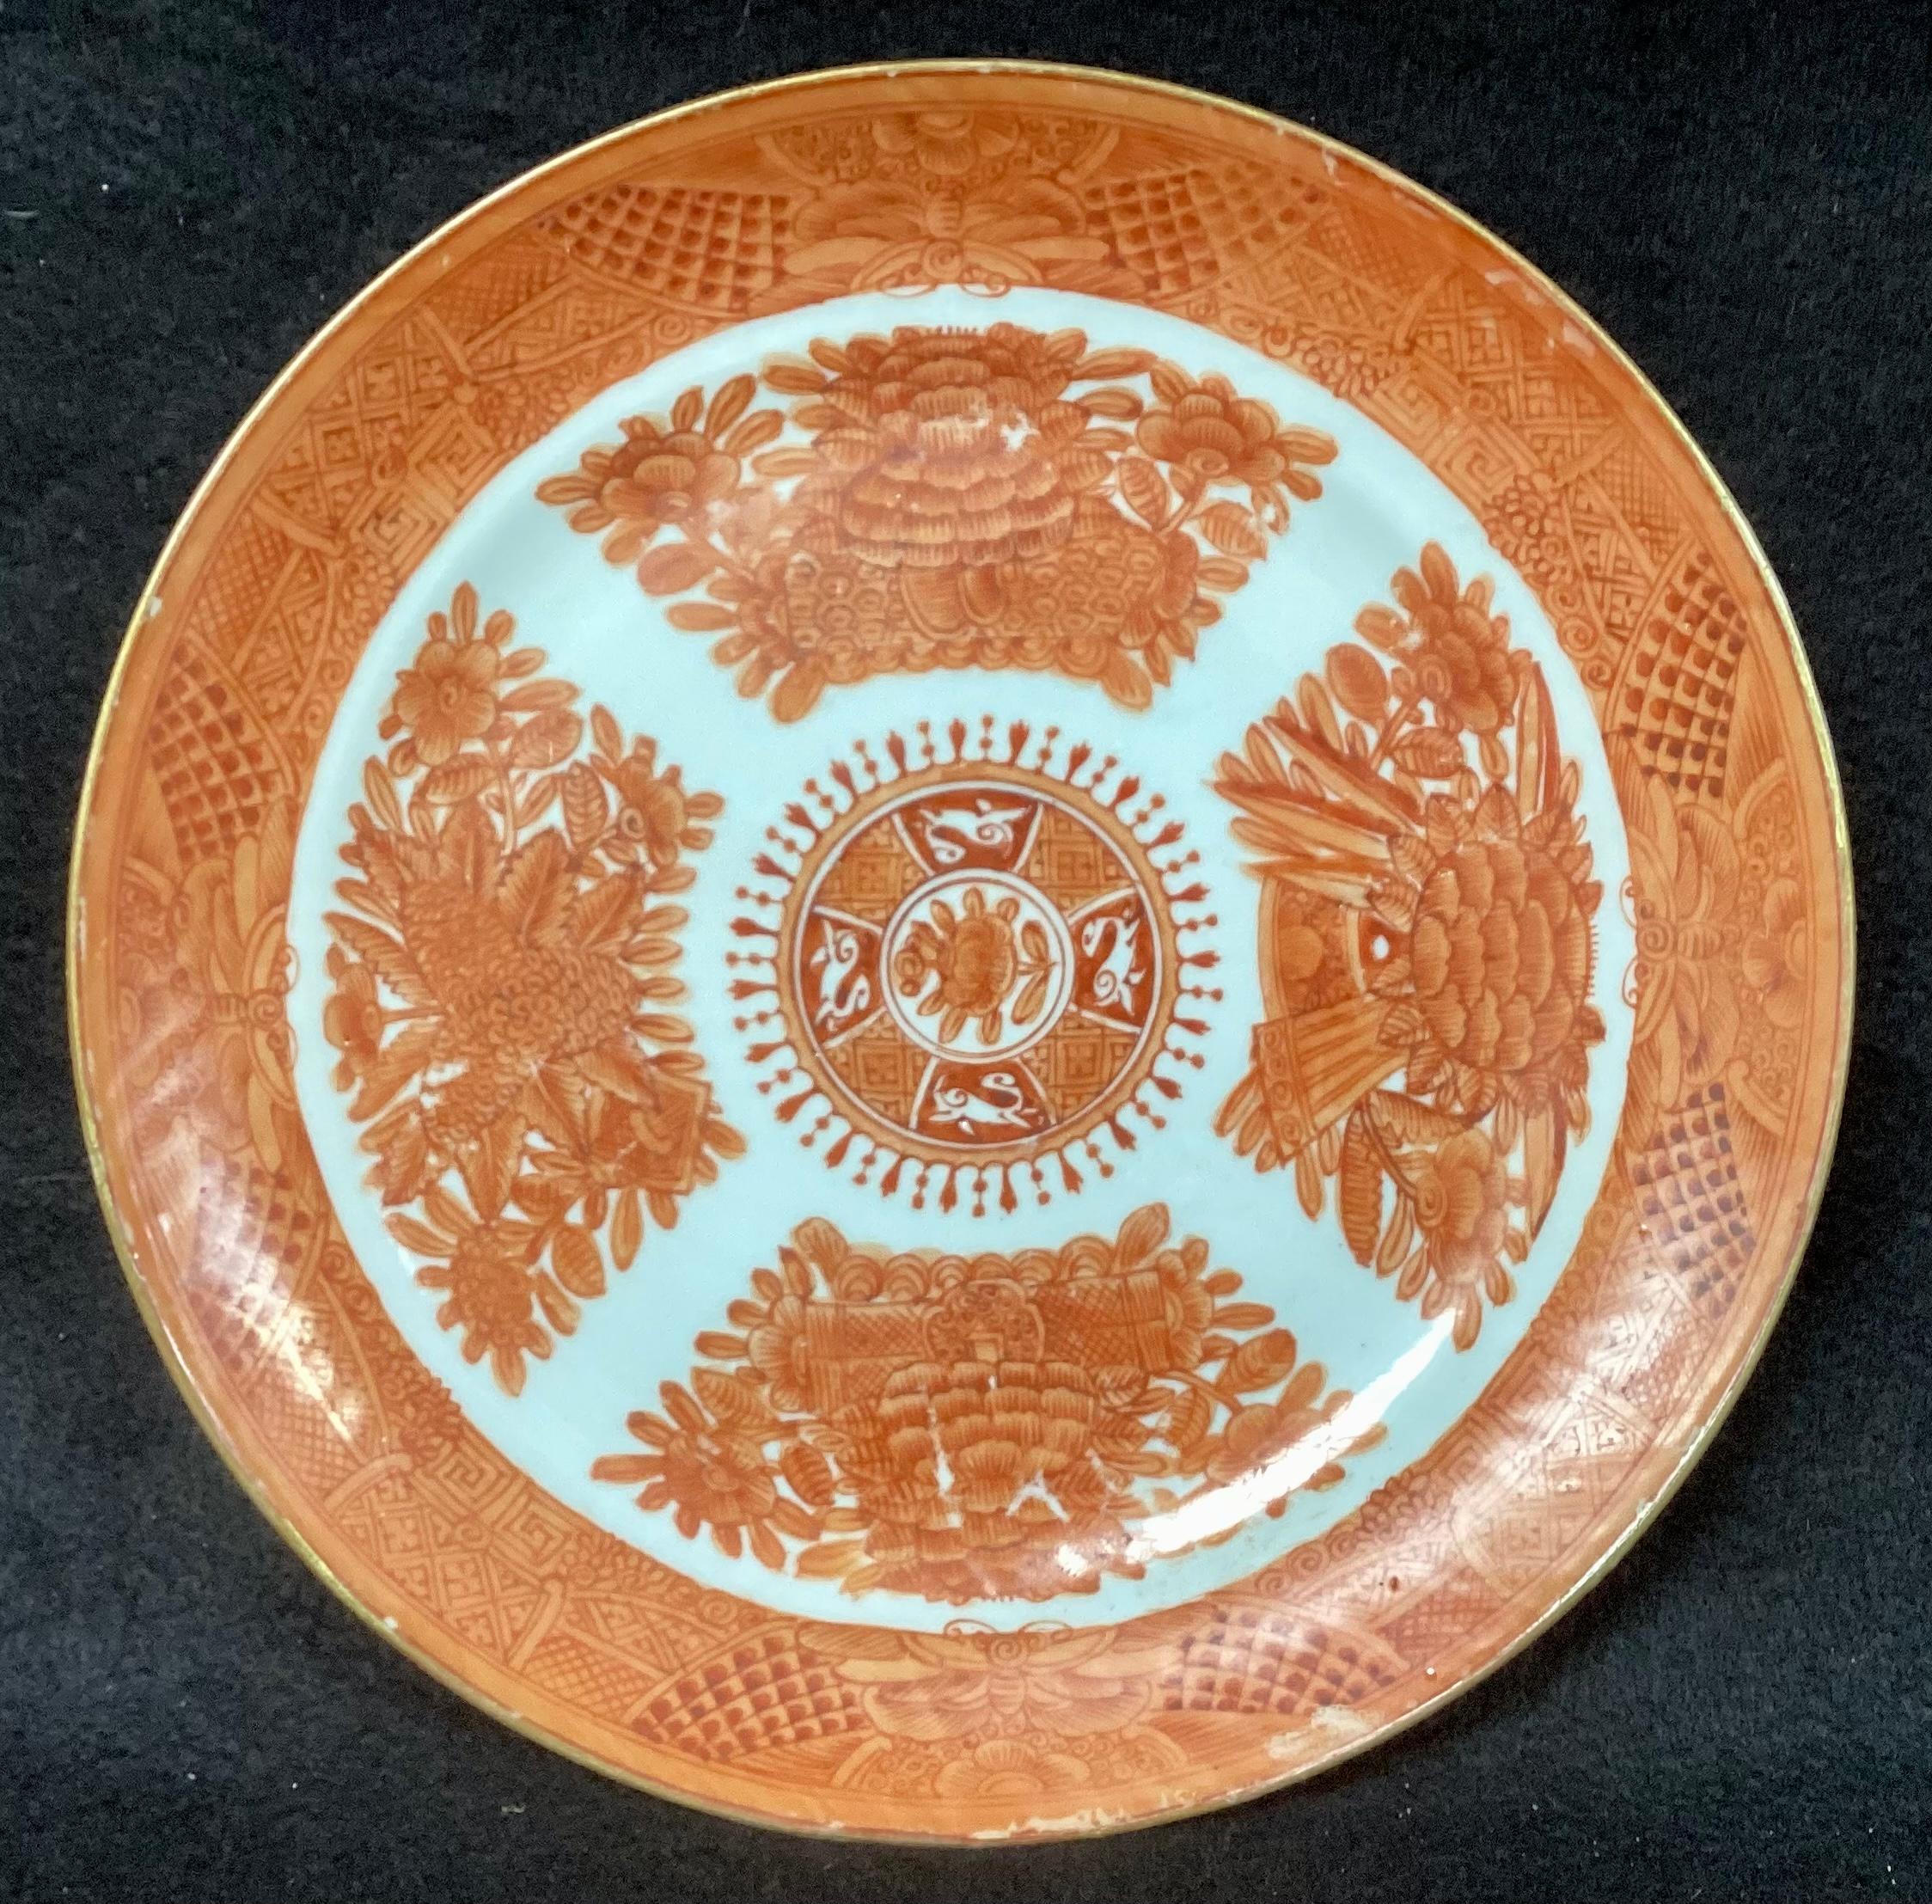 Set of two (2) 19th century Chinese Export Orange Fitzhugh appetizer - salad plates with gold rims. Good condition.

Dimensions: 10